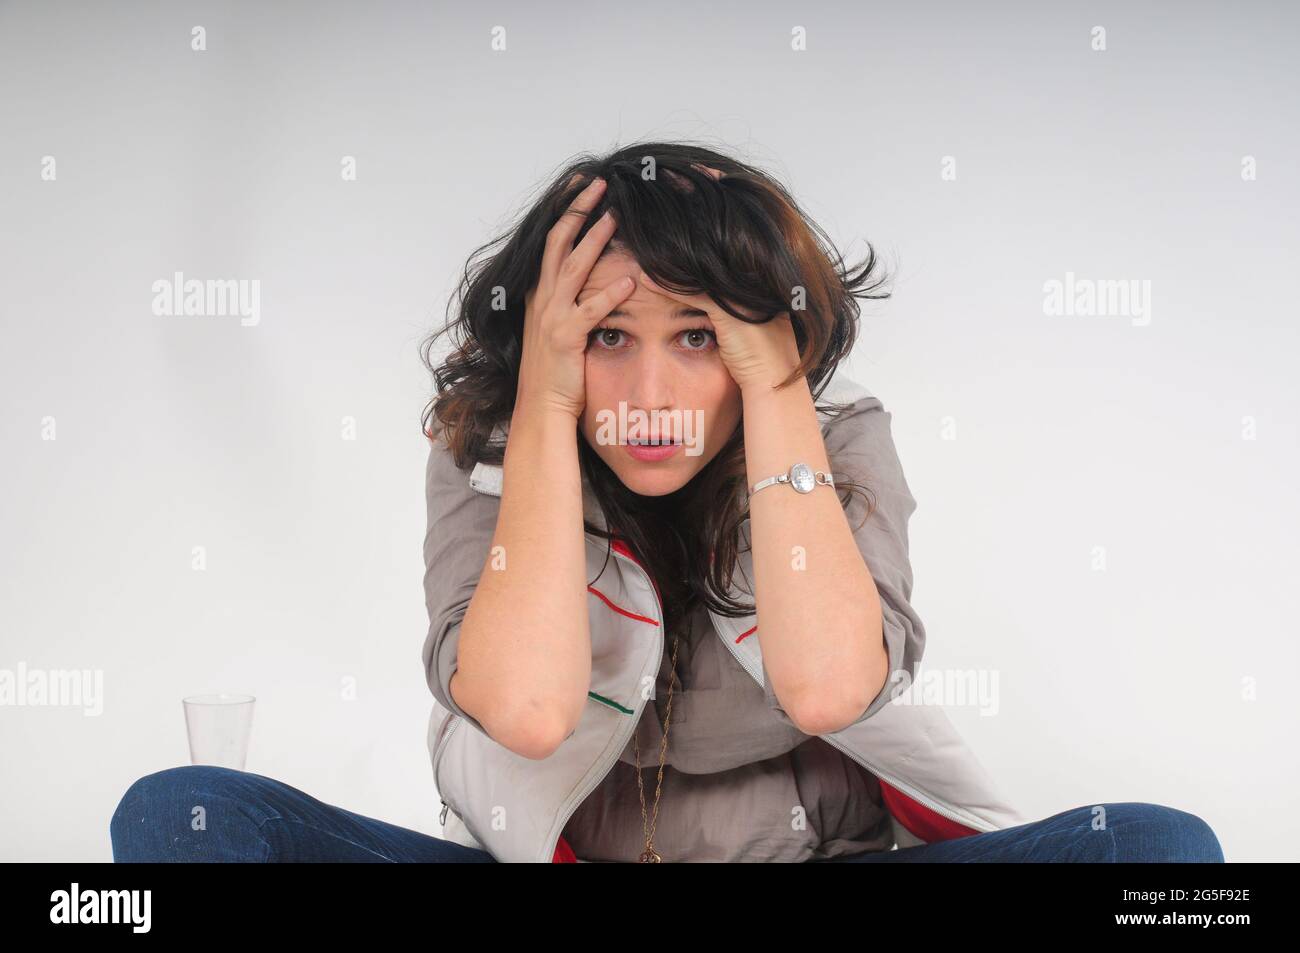 exaggerated and comic look at a young frightened woman hugging herself in fear studio shot on white background Stock Photo